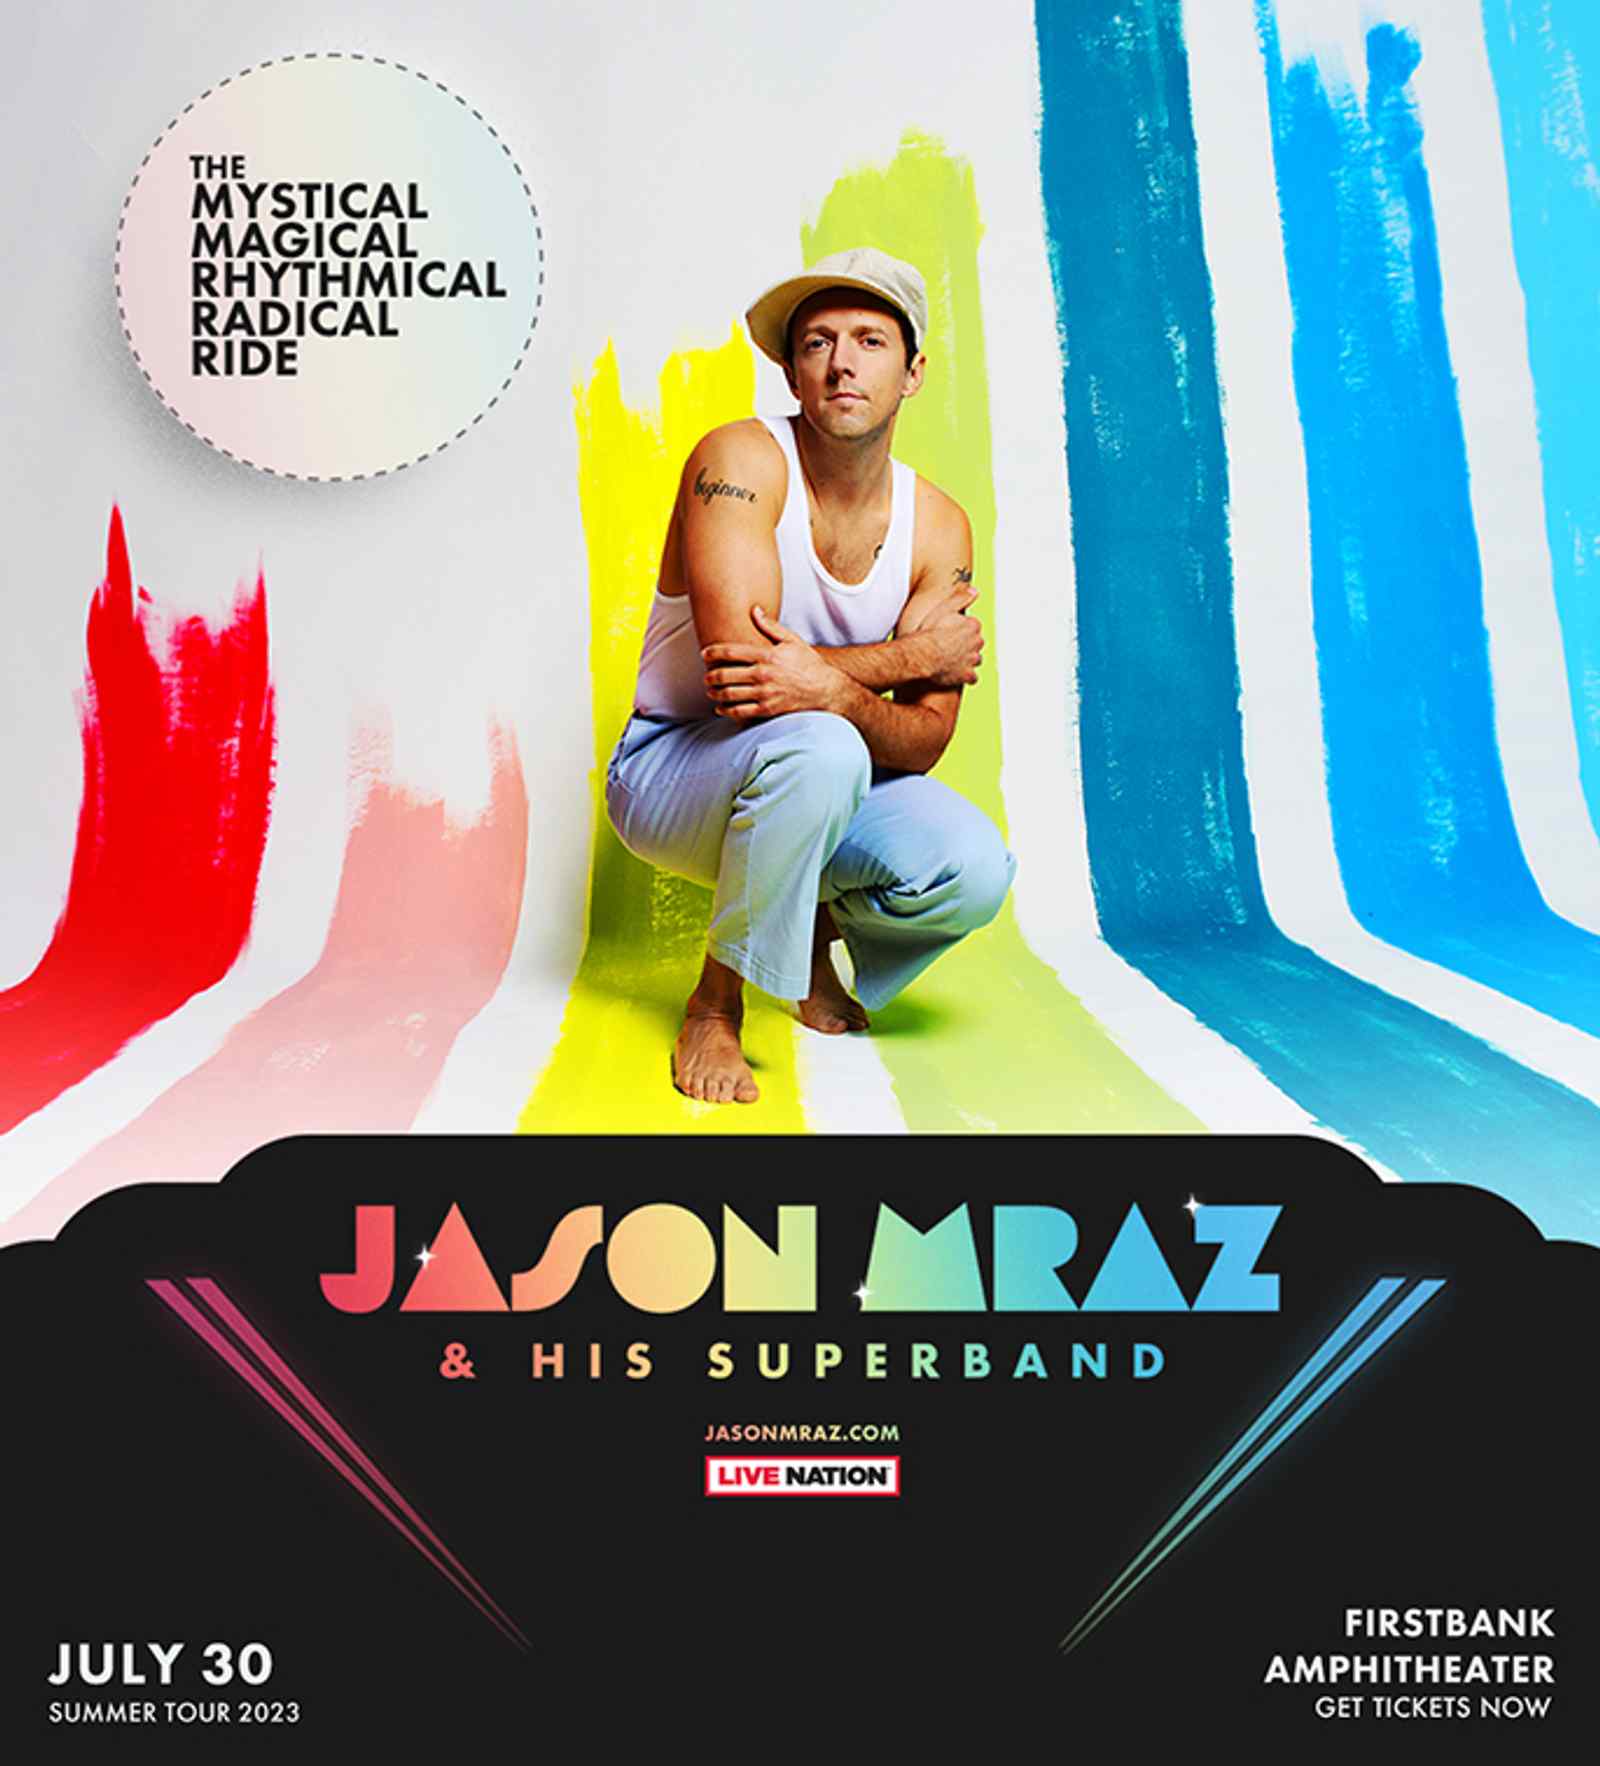 Jason Mraz and His Super Band – The Mystical Magical Rhythmical Radical Ride at FirstBank Amphitheater.